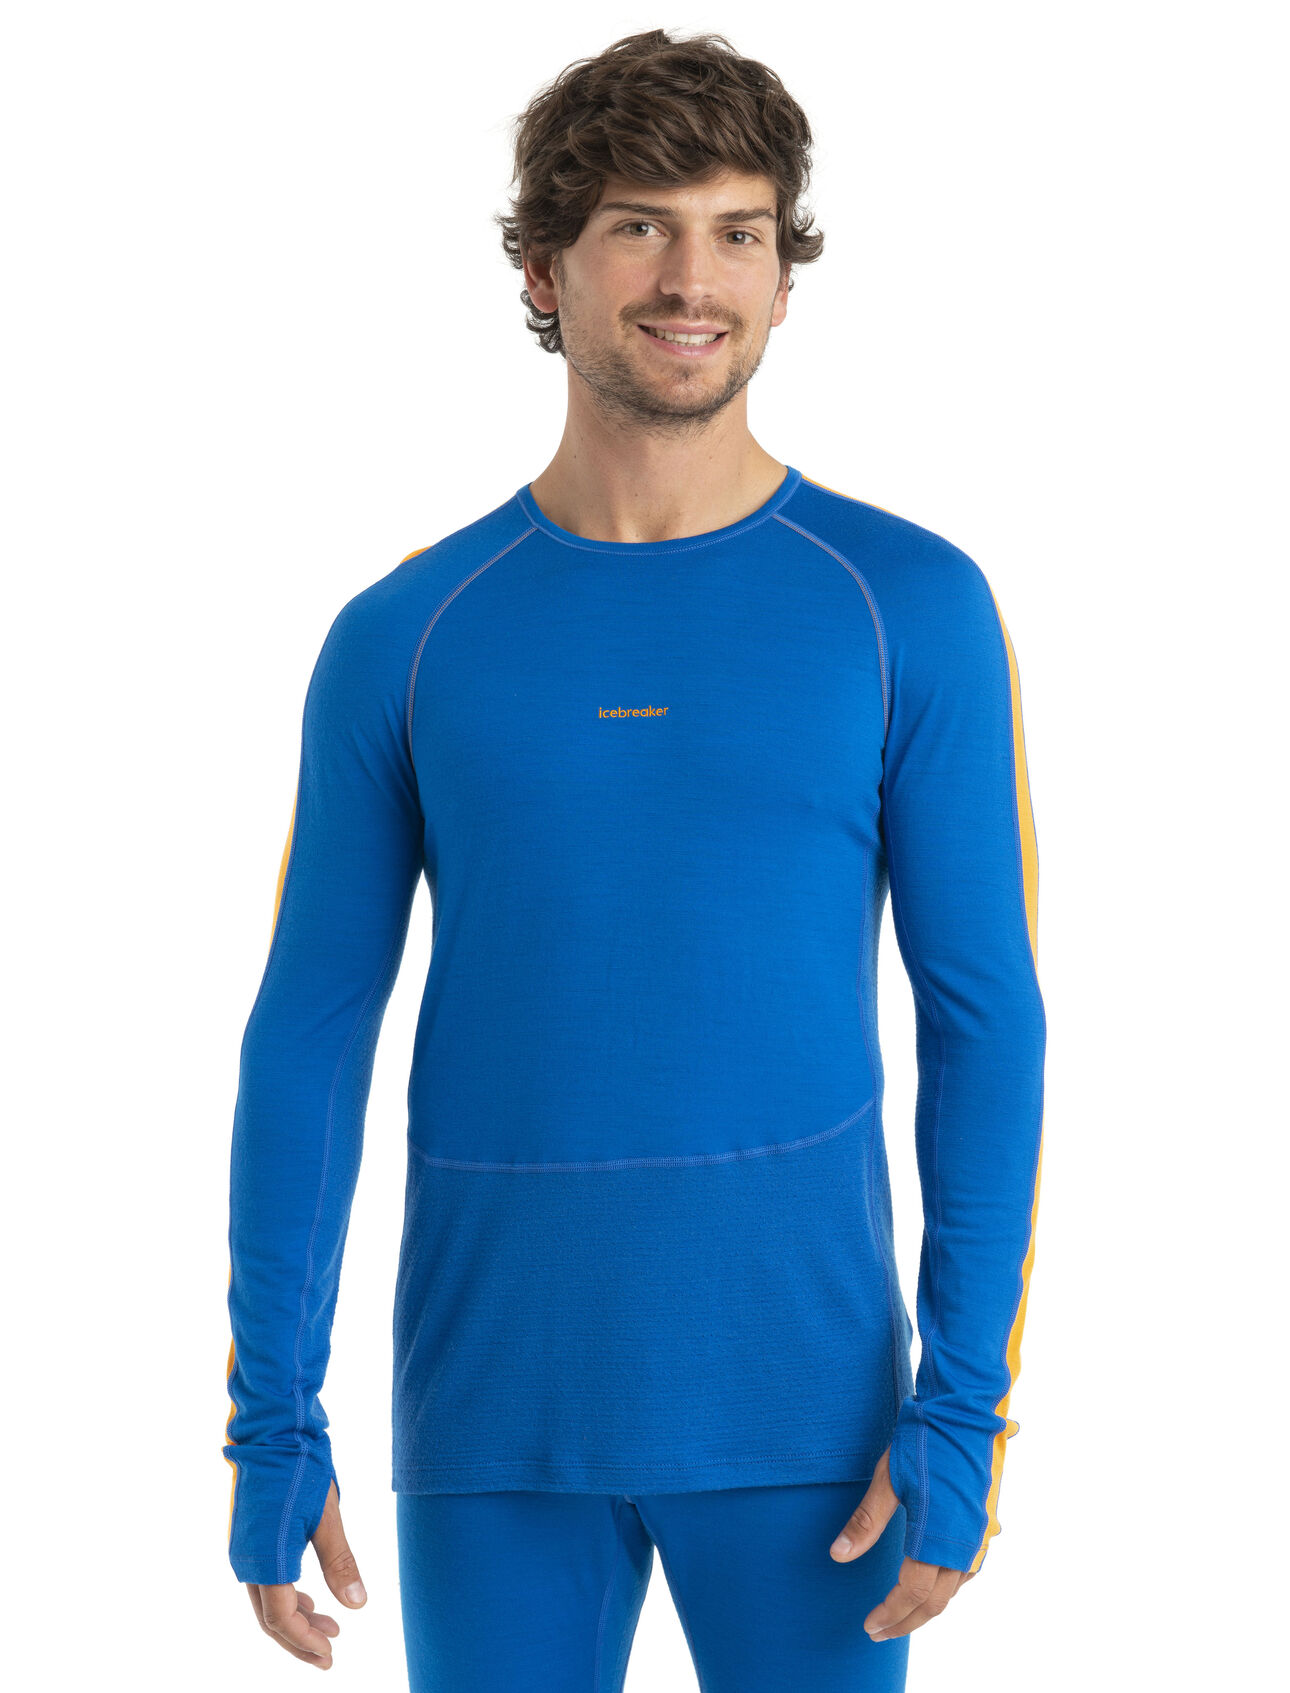 Mens 200 ZoneKnit™ Merino Long Sleeve Crewe Thermal Top A midweight merino base layer top designed to help regulate temperature during high-intensity activity, the 200 ZoneKnit™ Long Sleeve Crewe features 100% pure and natural merino wool.